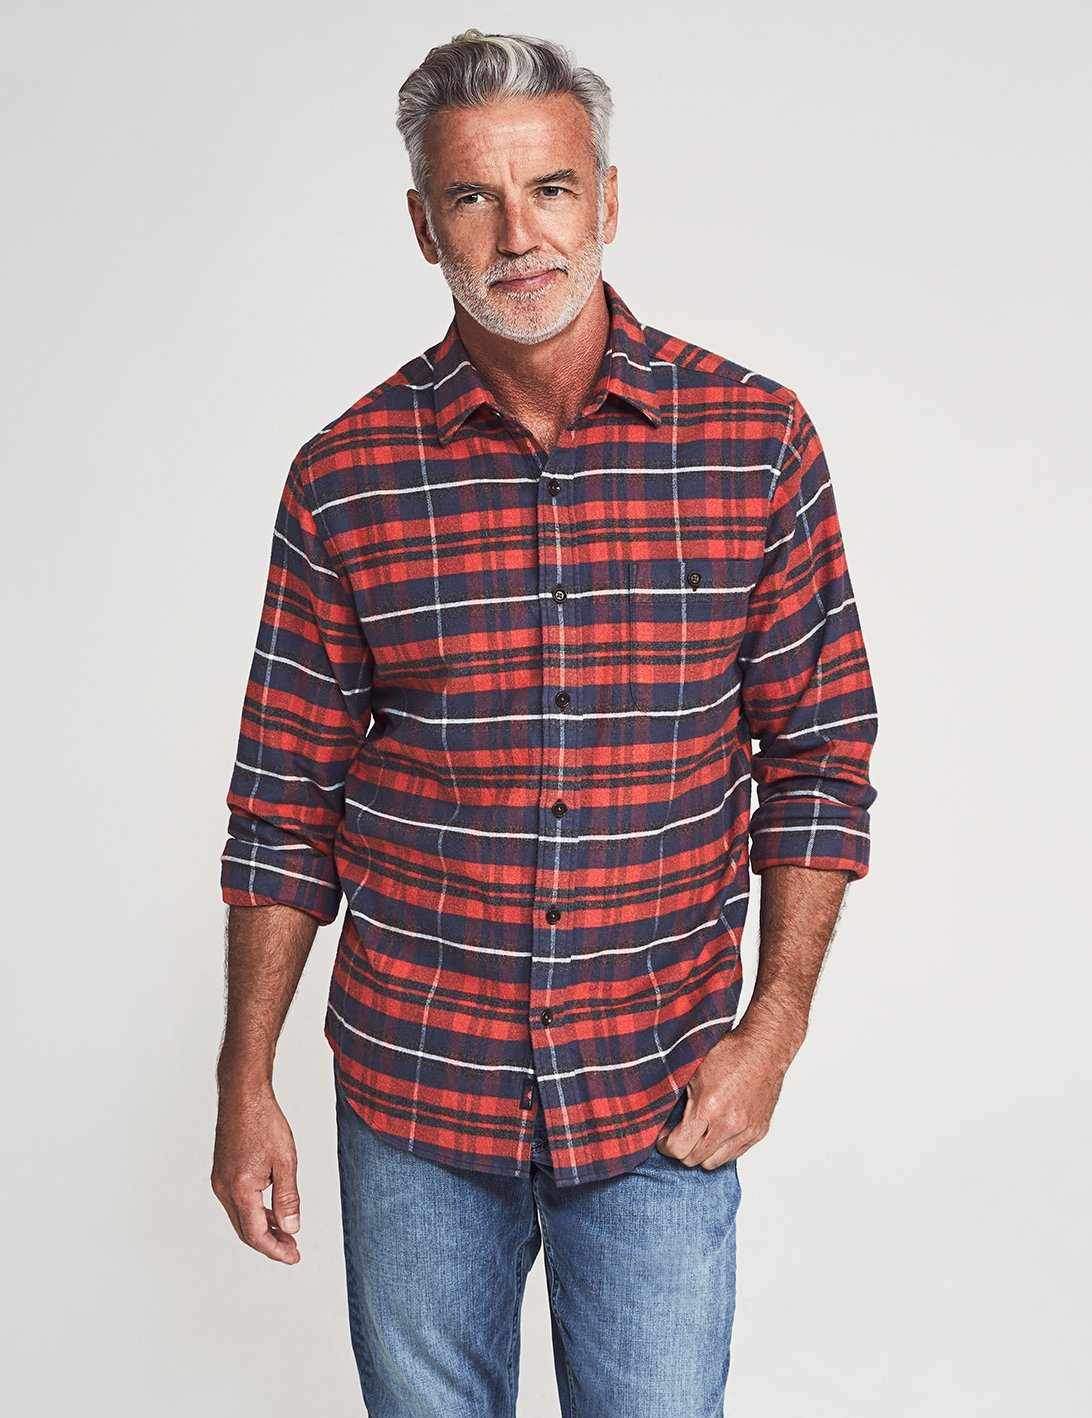 Winter Steals - Save Up To 50% Off Faherty Men's Flannels, Henleys ...